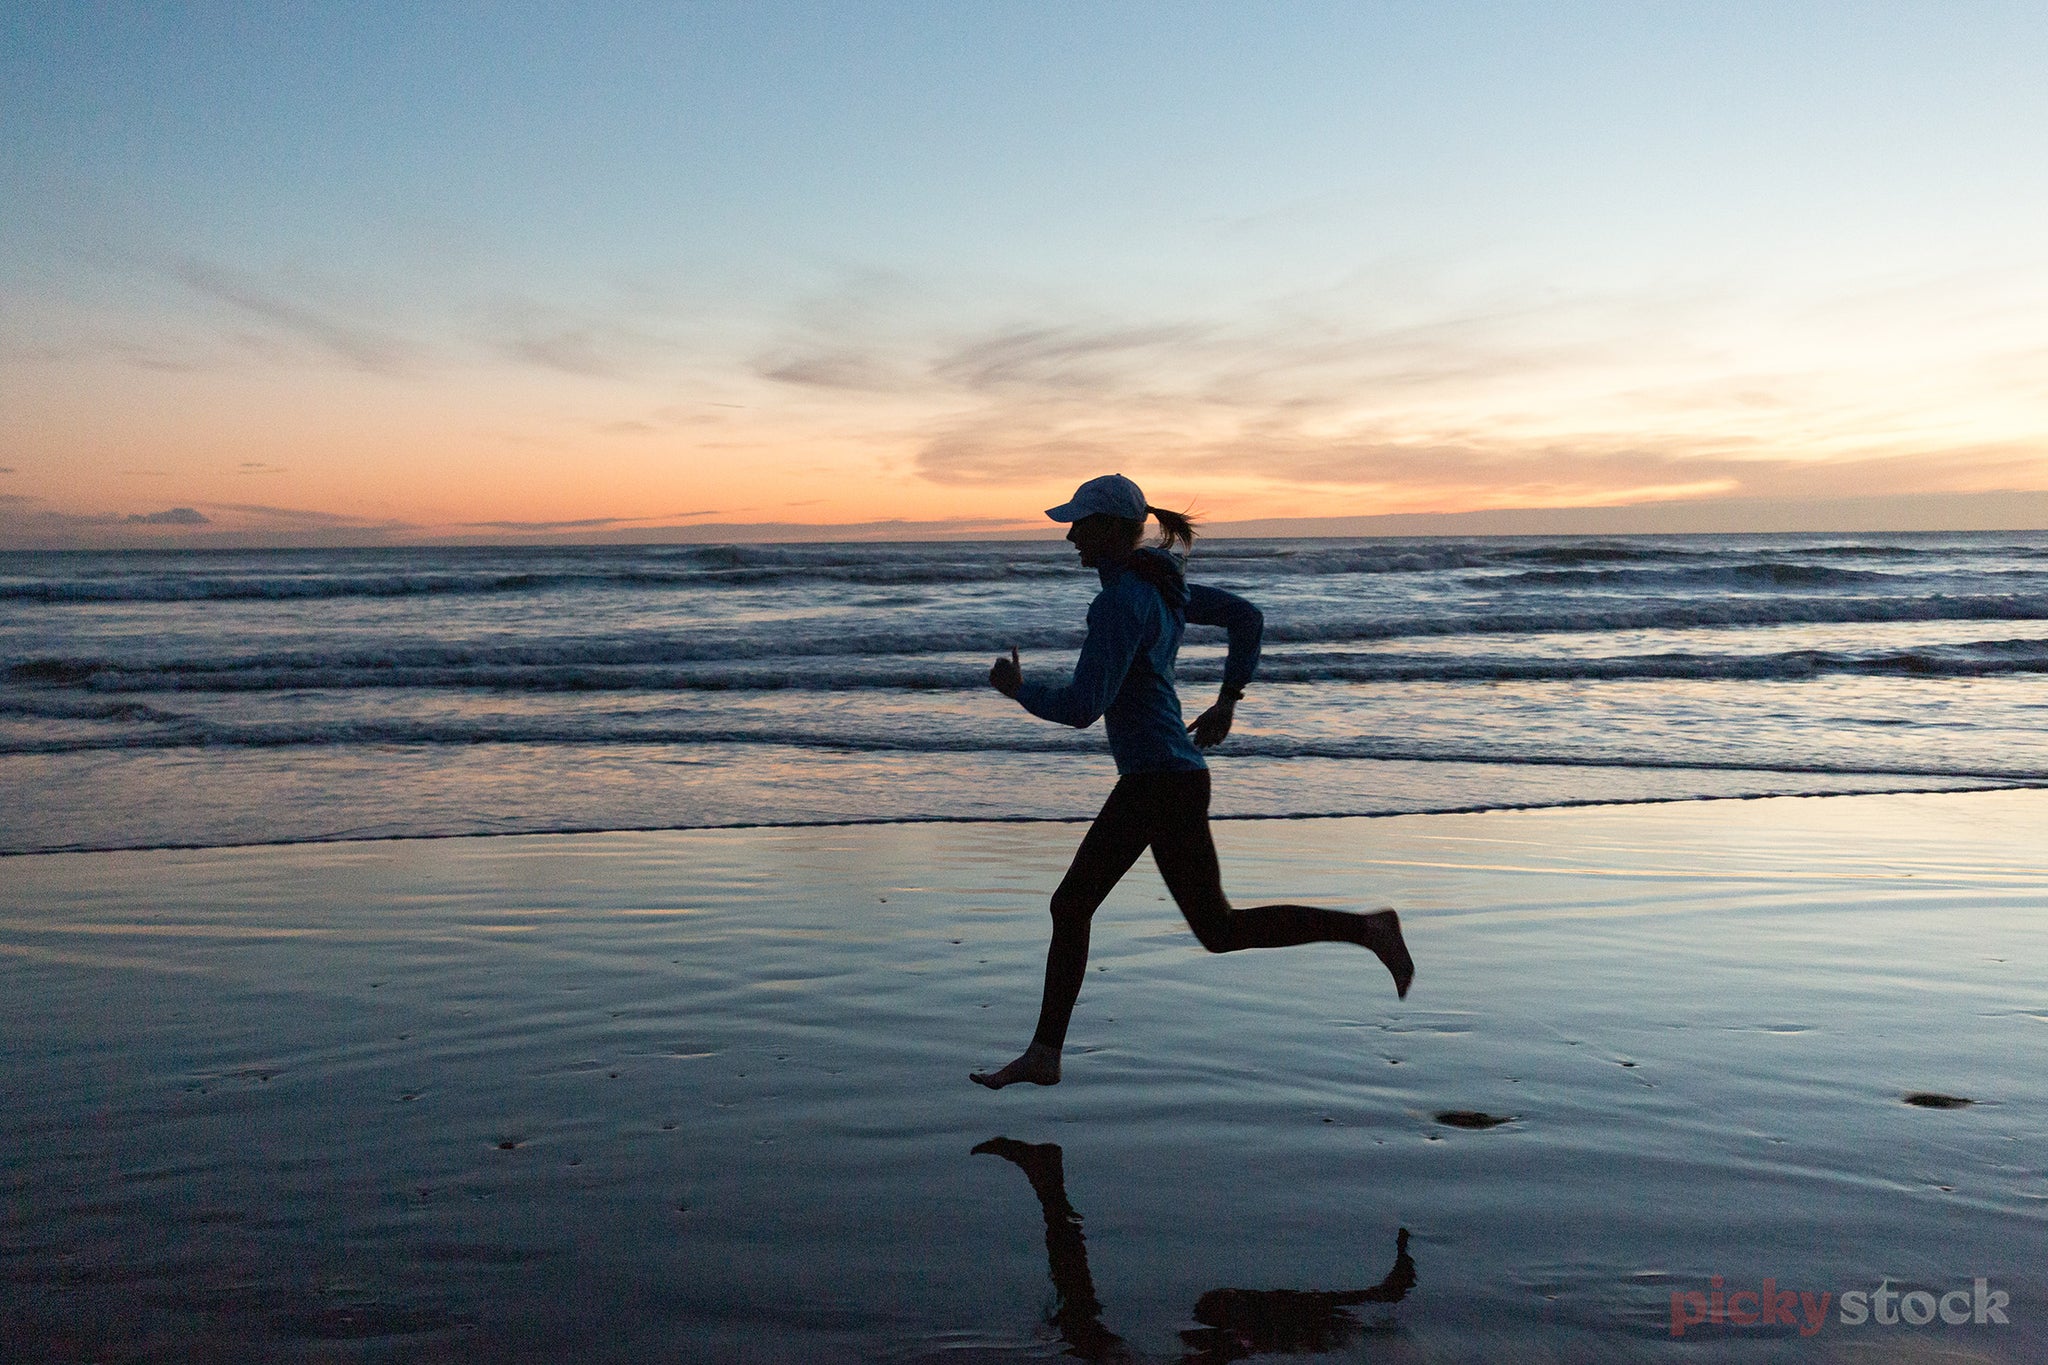 Lady runs along beach at dawn / dusk.  Sky is a dark blue with a bright orange along horizon line. Lady is centre of frame as a black outline. 